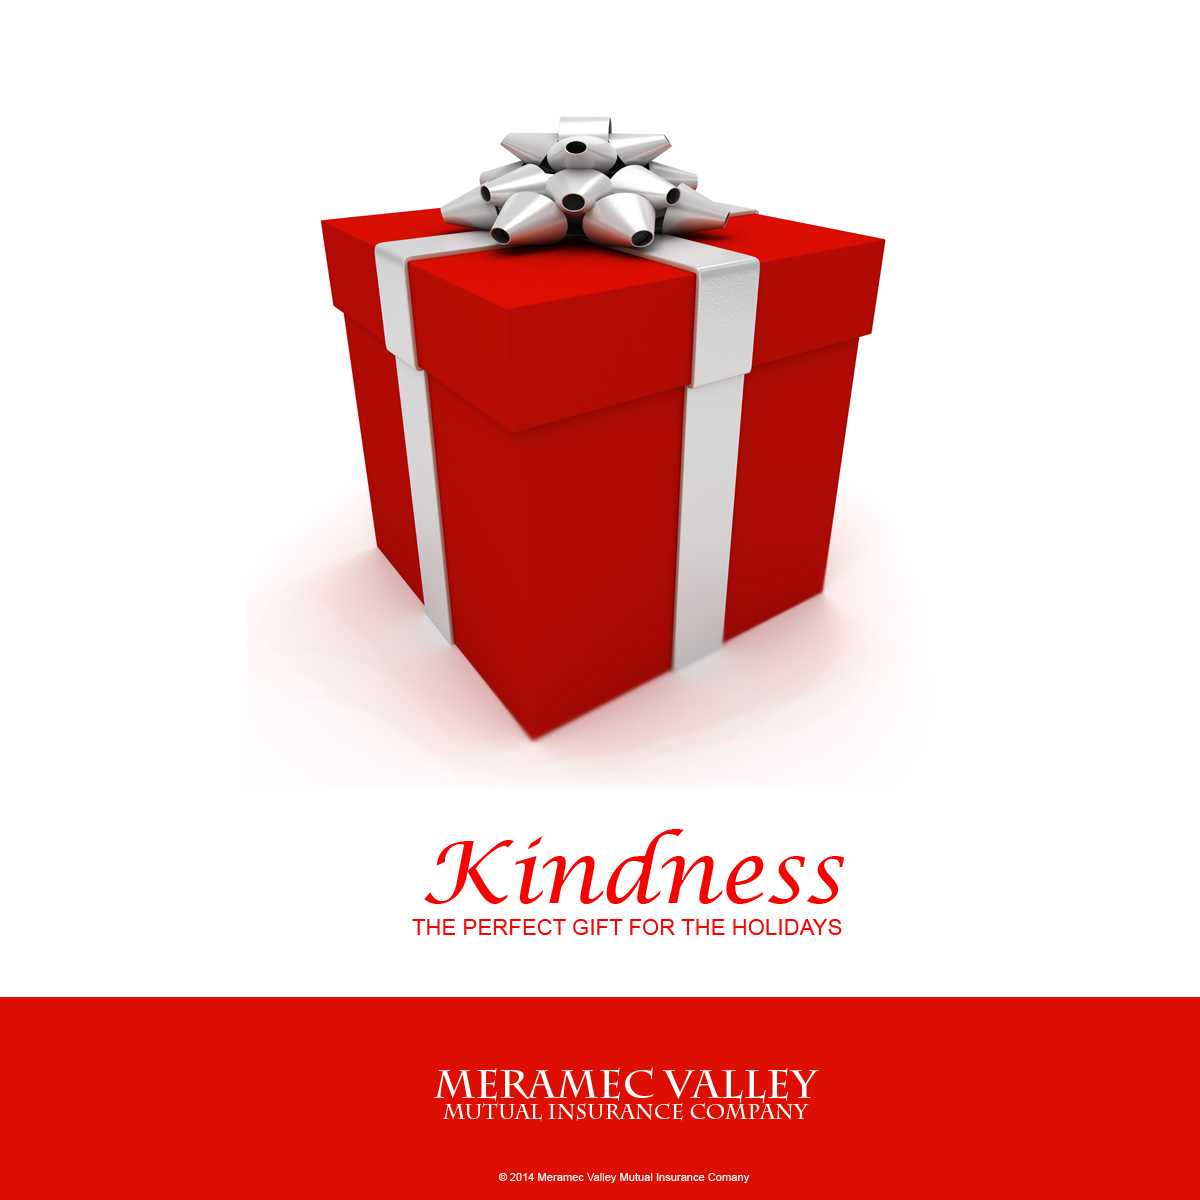 Give the Gift of Kindness this Holiday Season